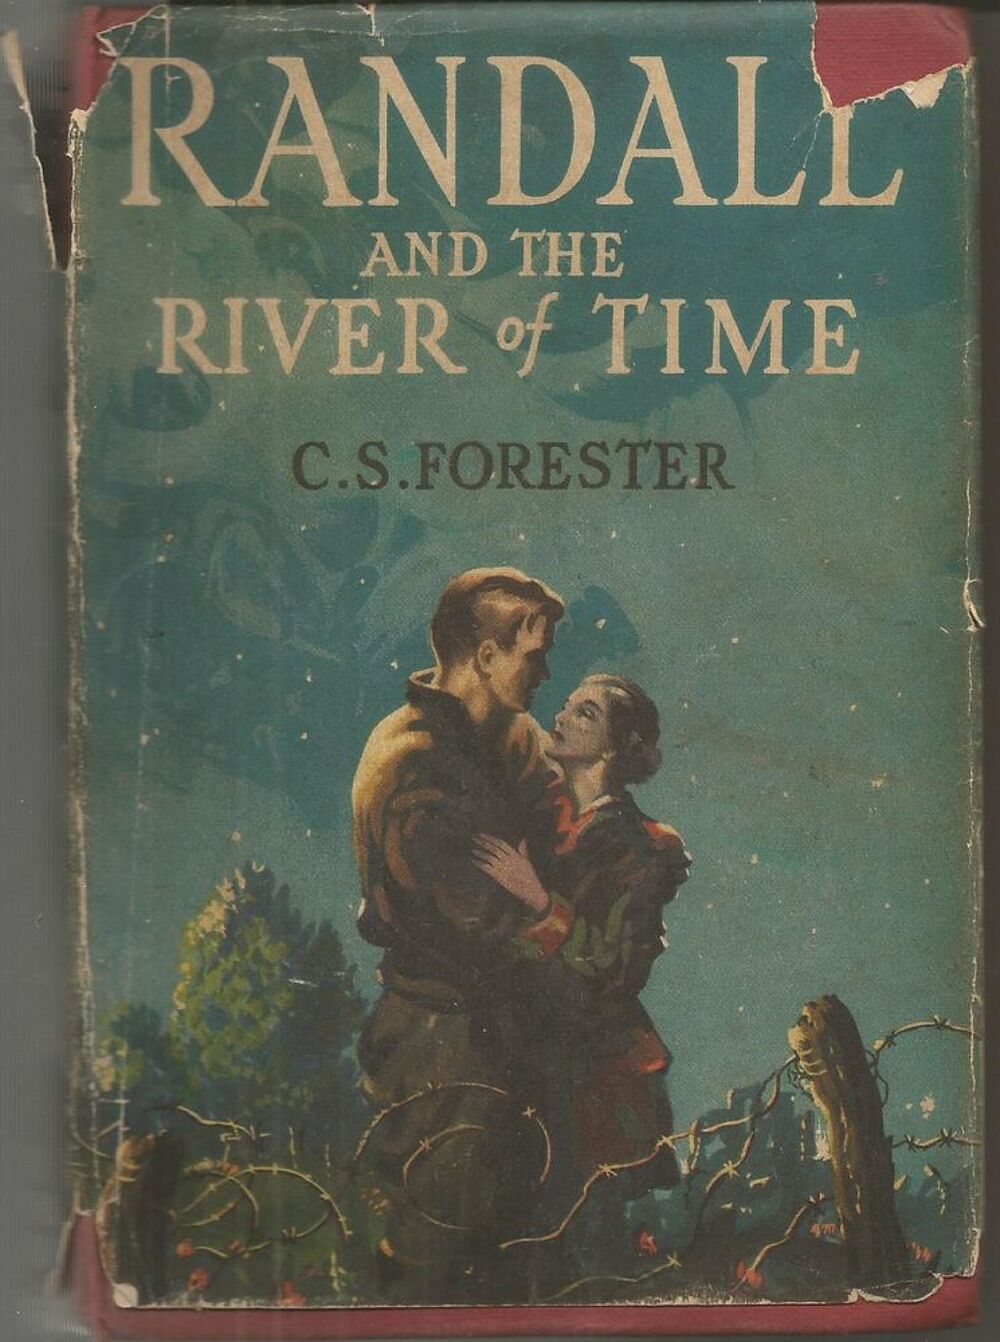 C S FORESTER Randall and the river of time (en anglais) Livres et BD